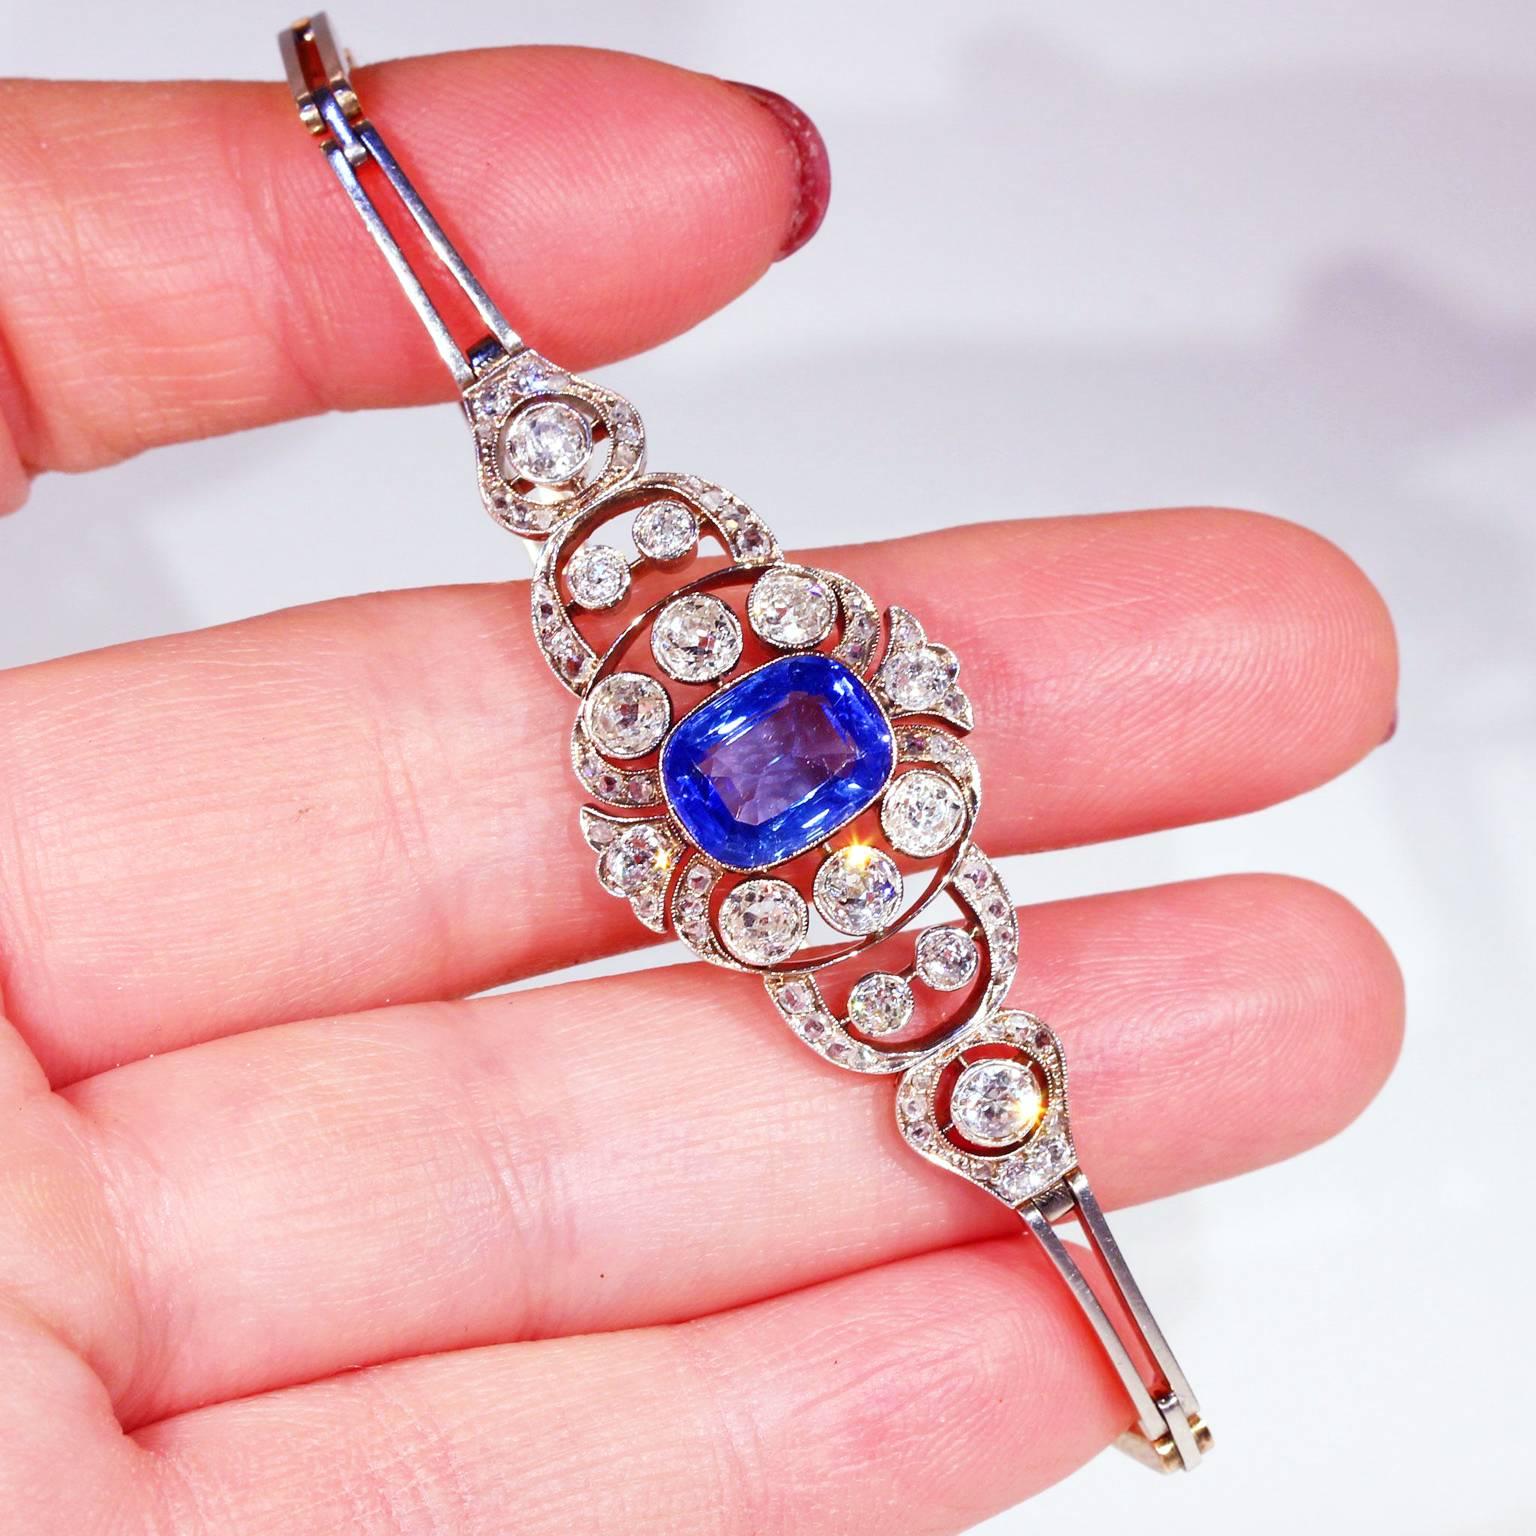 Pre-Revolutionary Russian Untreated Ceylon Sapphire and Diamond Bracelet In Excellent Condition For Sale In Middleton, WI